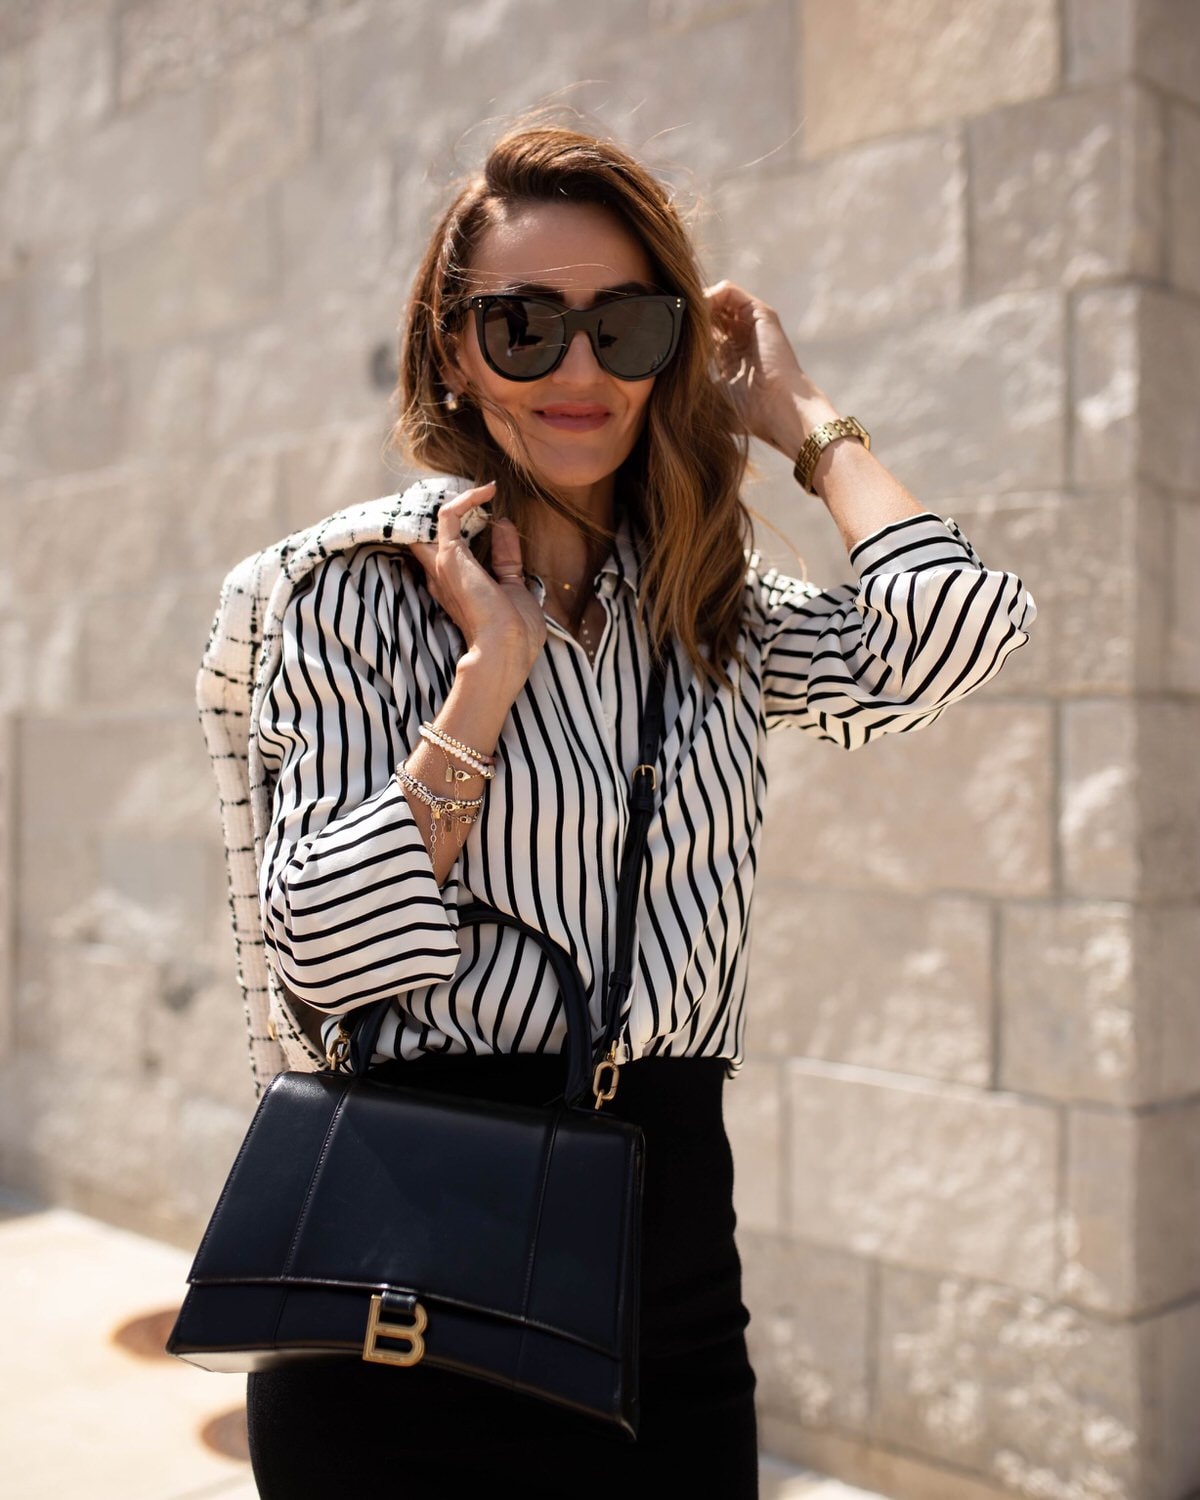 Work Wear: Dressier and More Casual Outfits - Karina Style Diaries